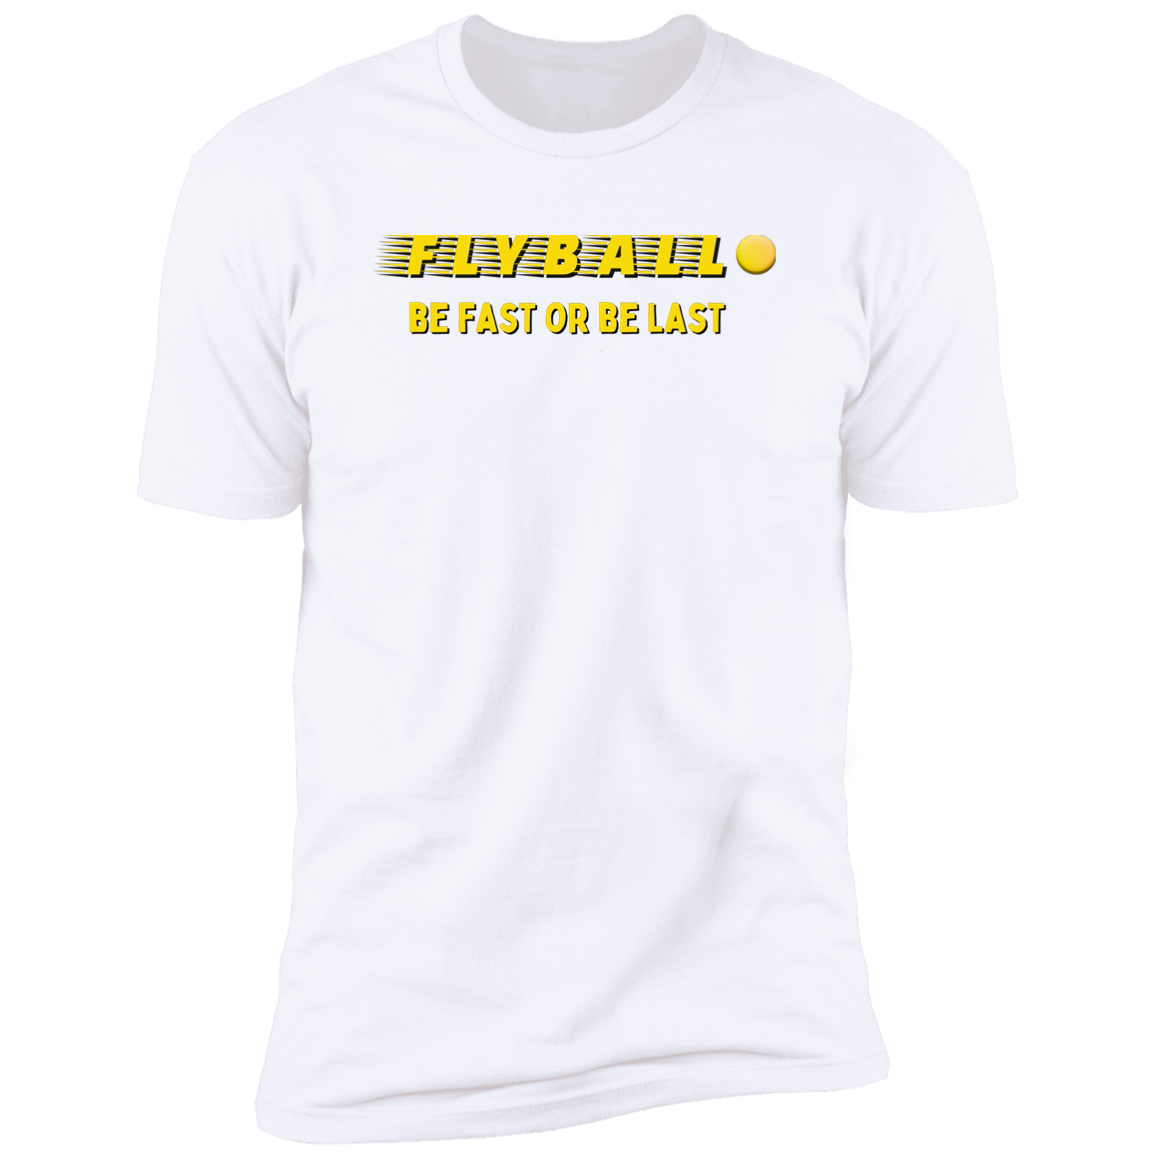 Flyball Be Fast or Be Last Dog Sport T-shirt, Flyball Shirt for humans, in white